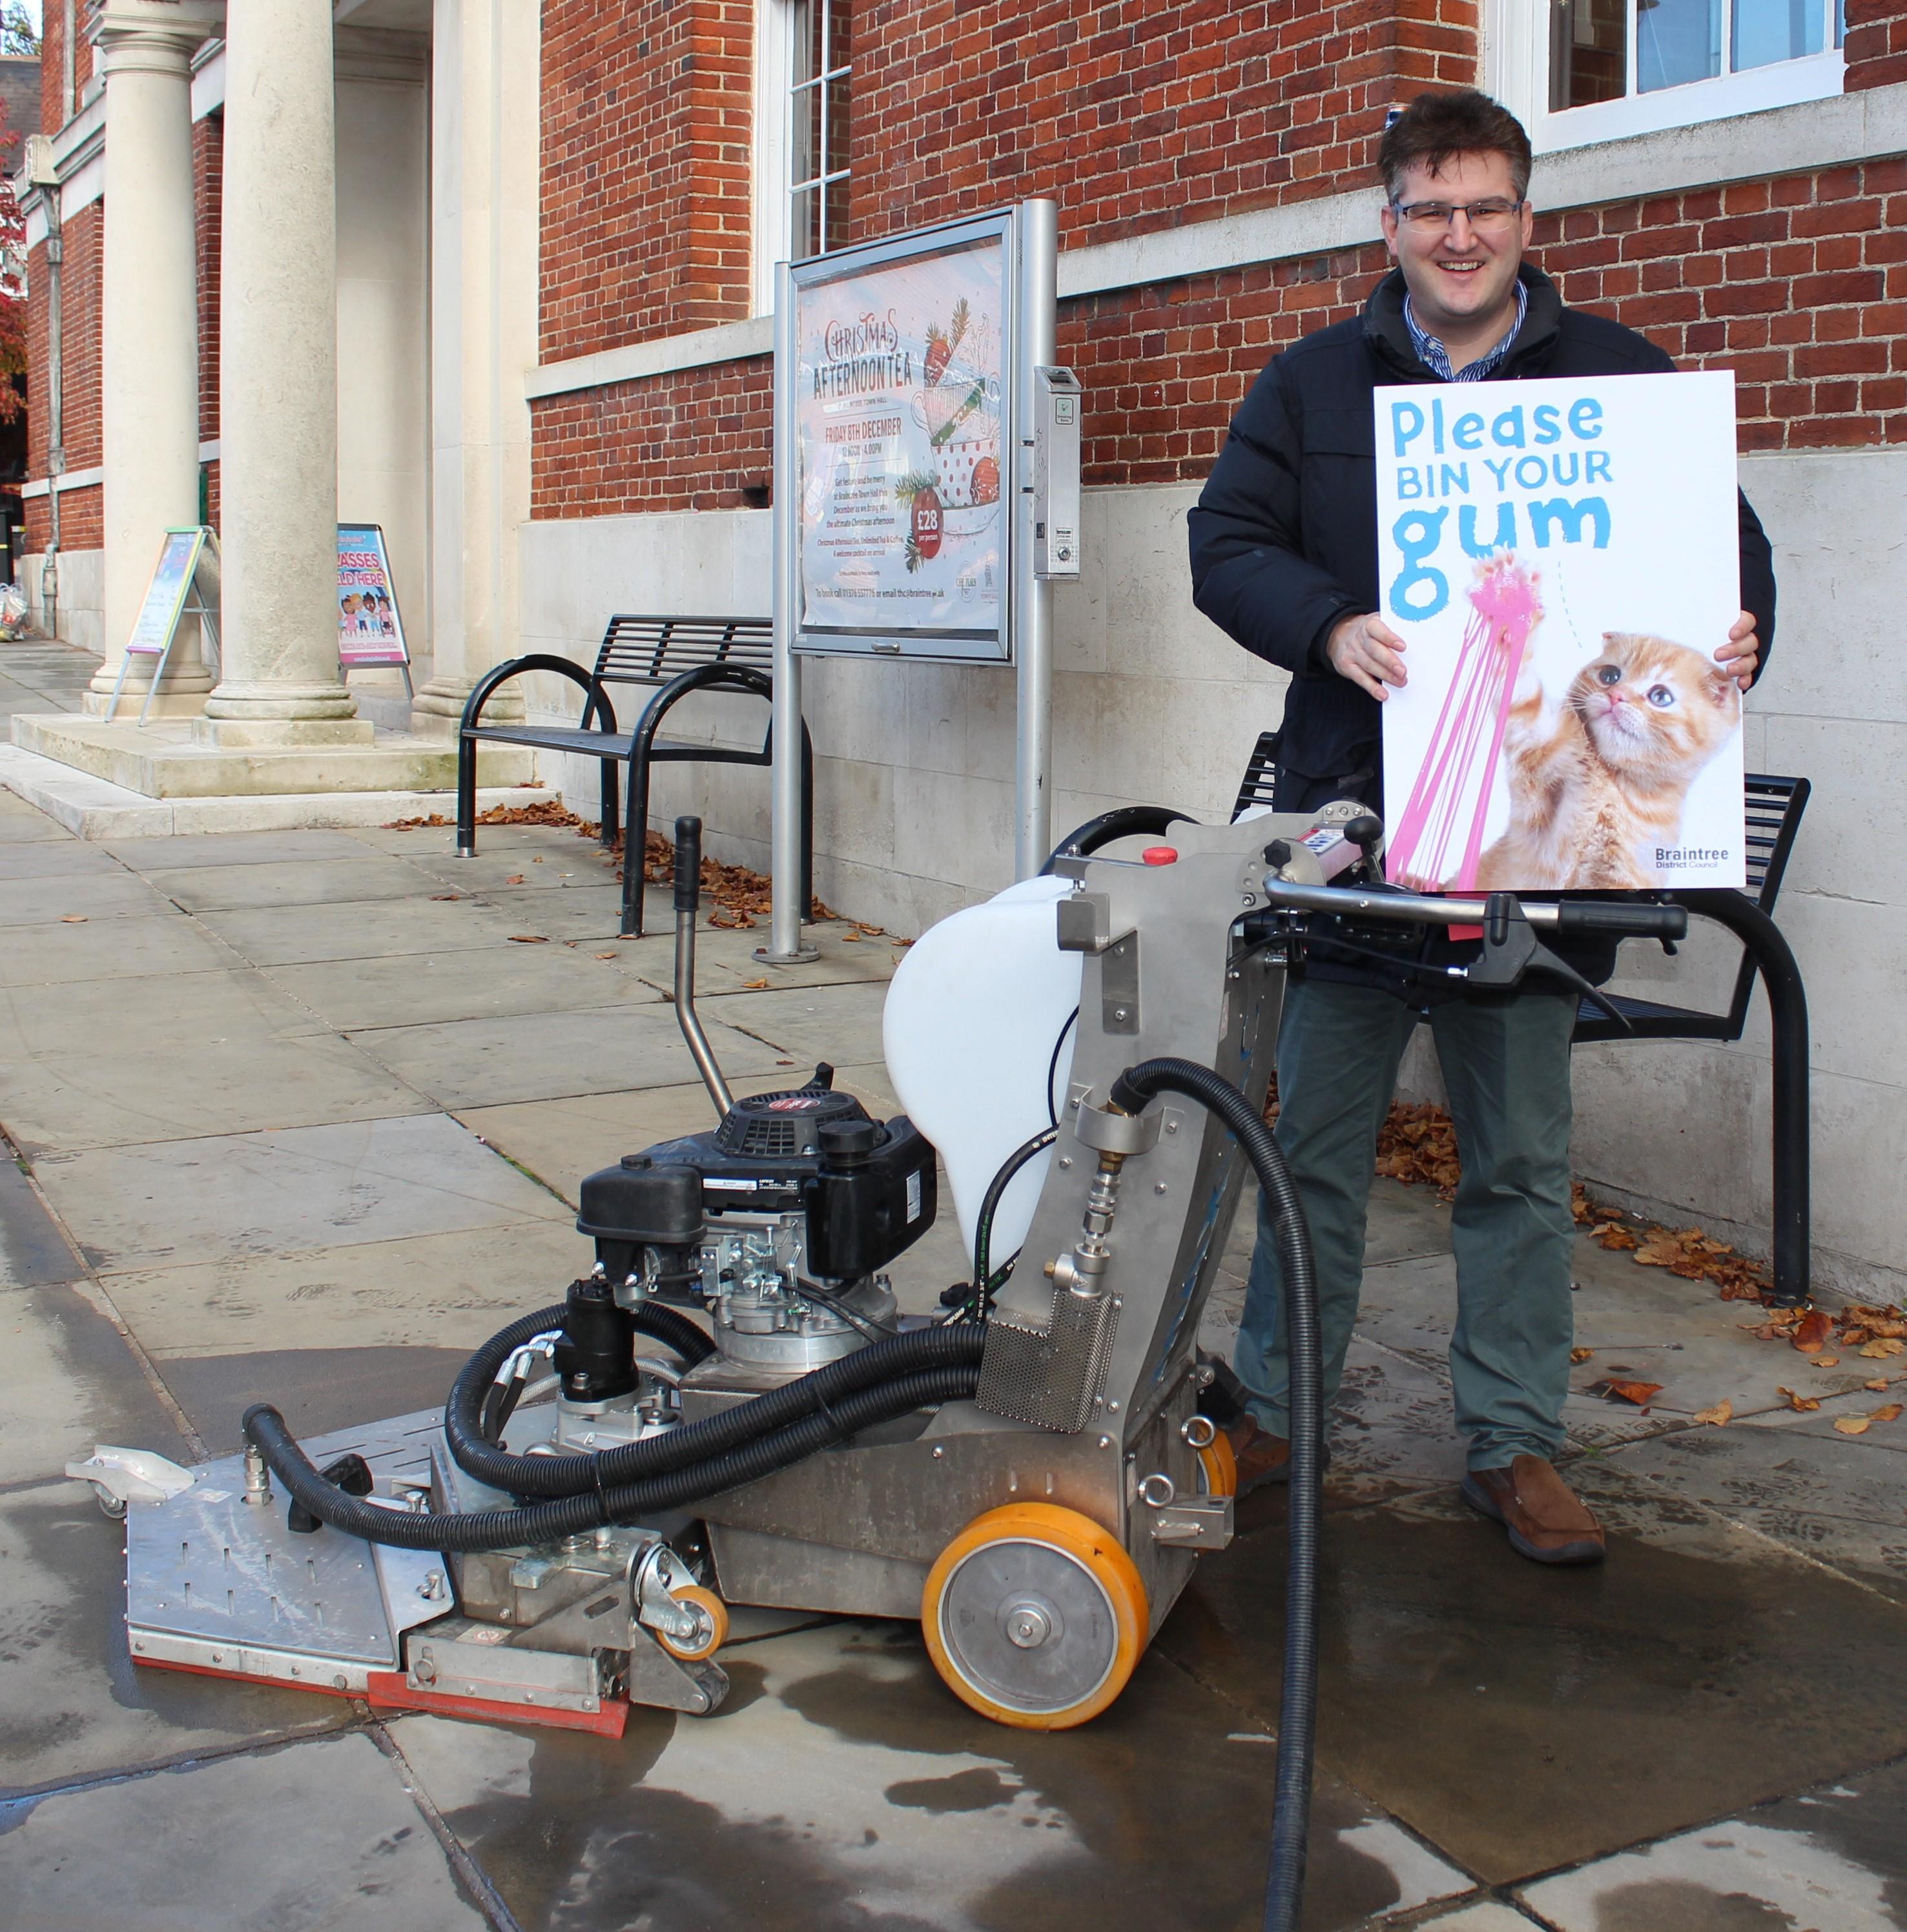 Cllr Tom Cunningham with gladiator gum machine and campaign bin your gum in town centre